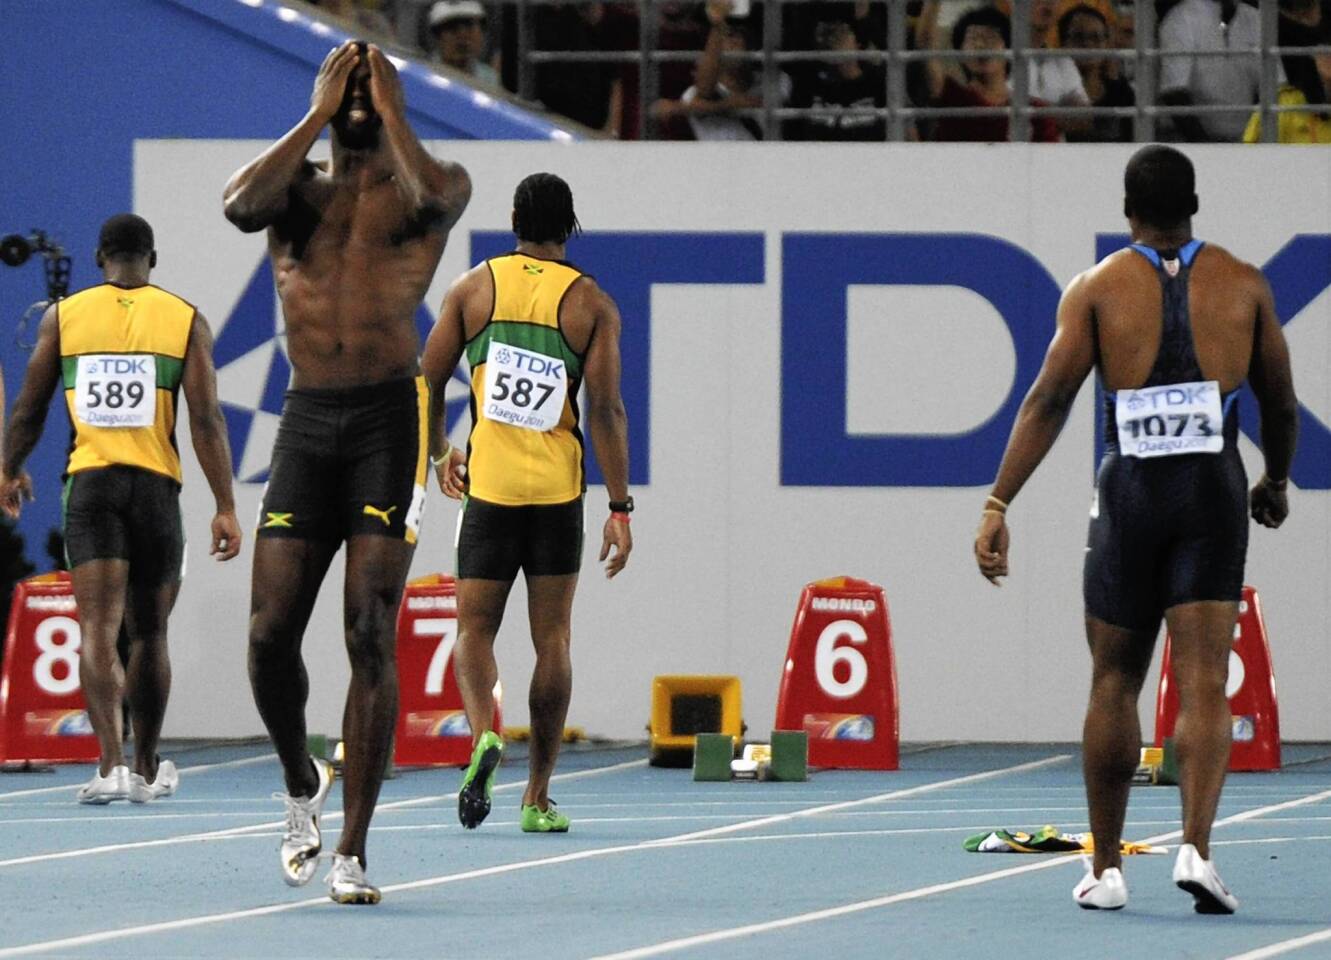 The official who declared Usain Bolt had false started in the final of the 100 meters at the World Track and Field Championships. It would have been easy to manufacture a scenario that could not be disproved and would have allowed the world's leading track athlete another chance (gun malfunction, timing malfunction, flinch by eventual winner Yohan Blake.)